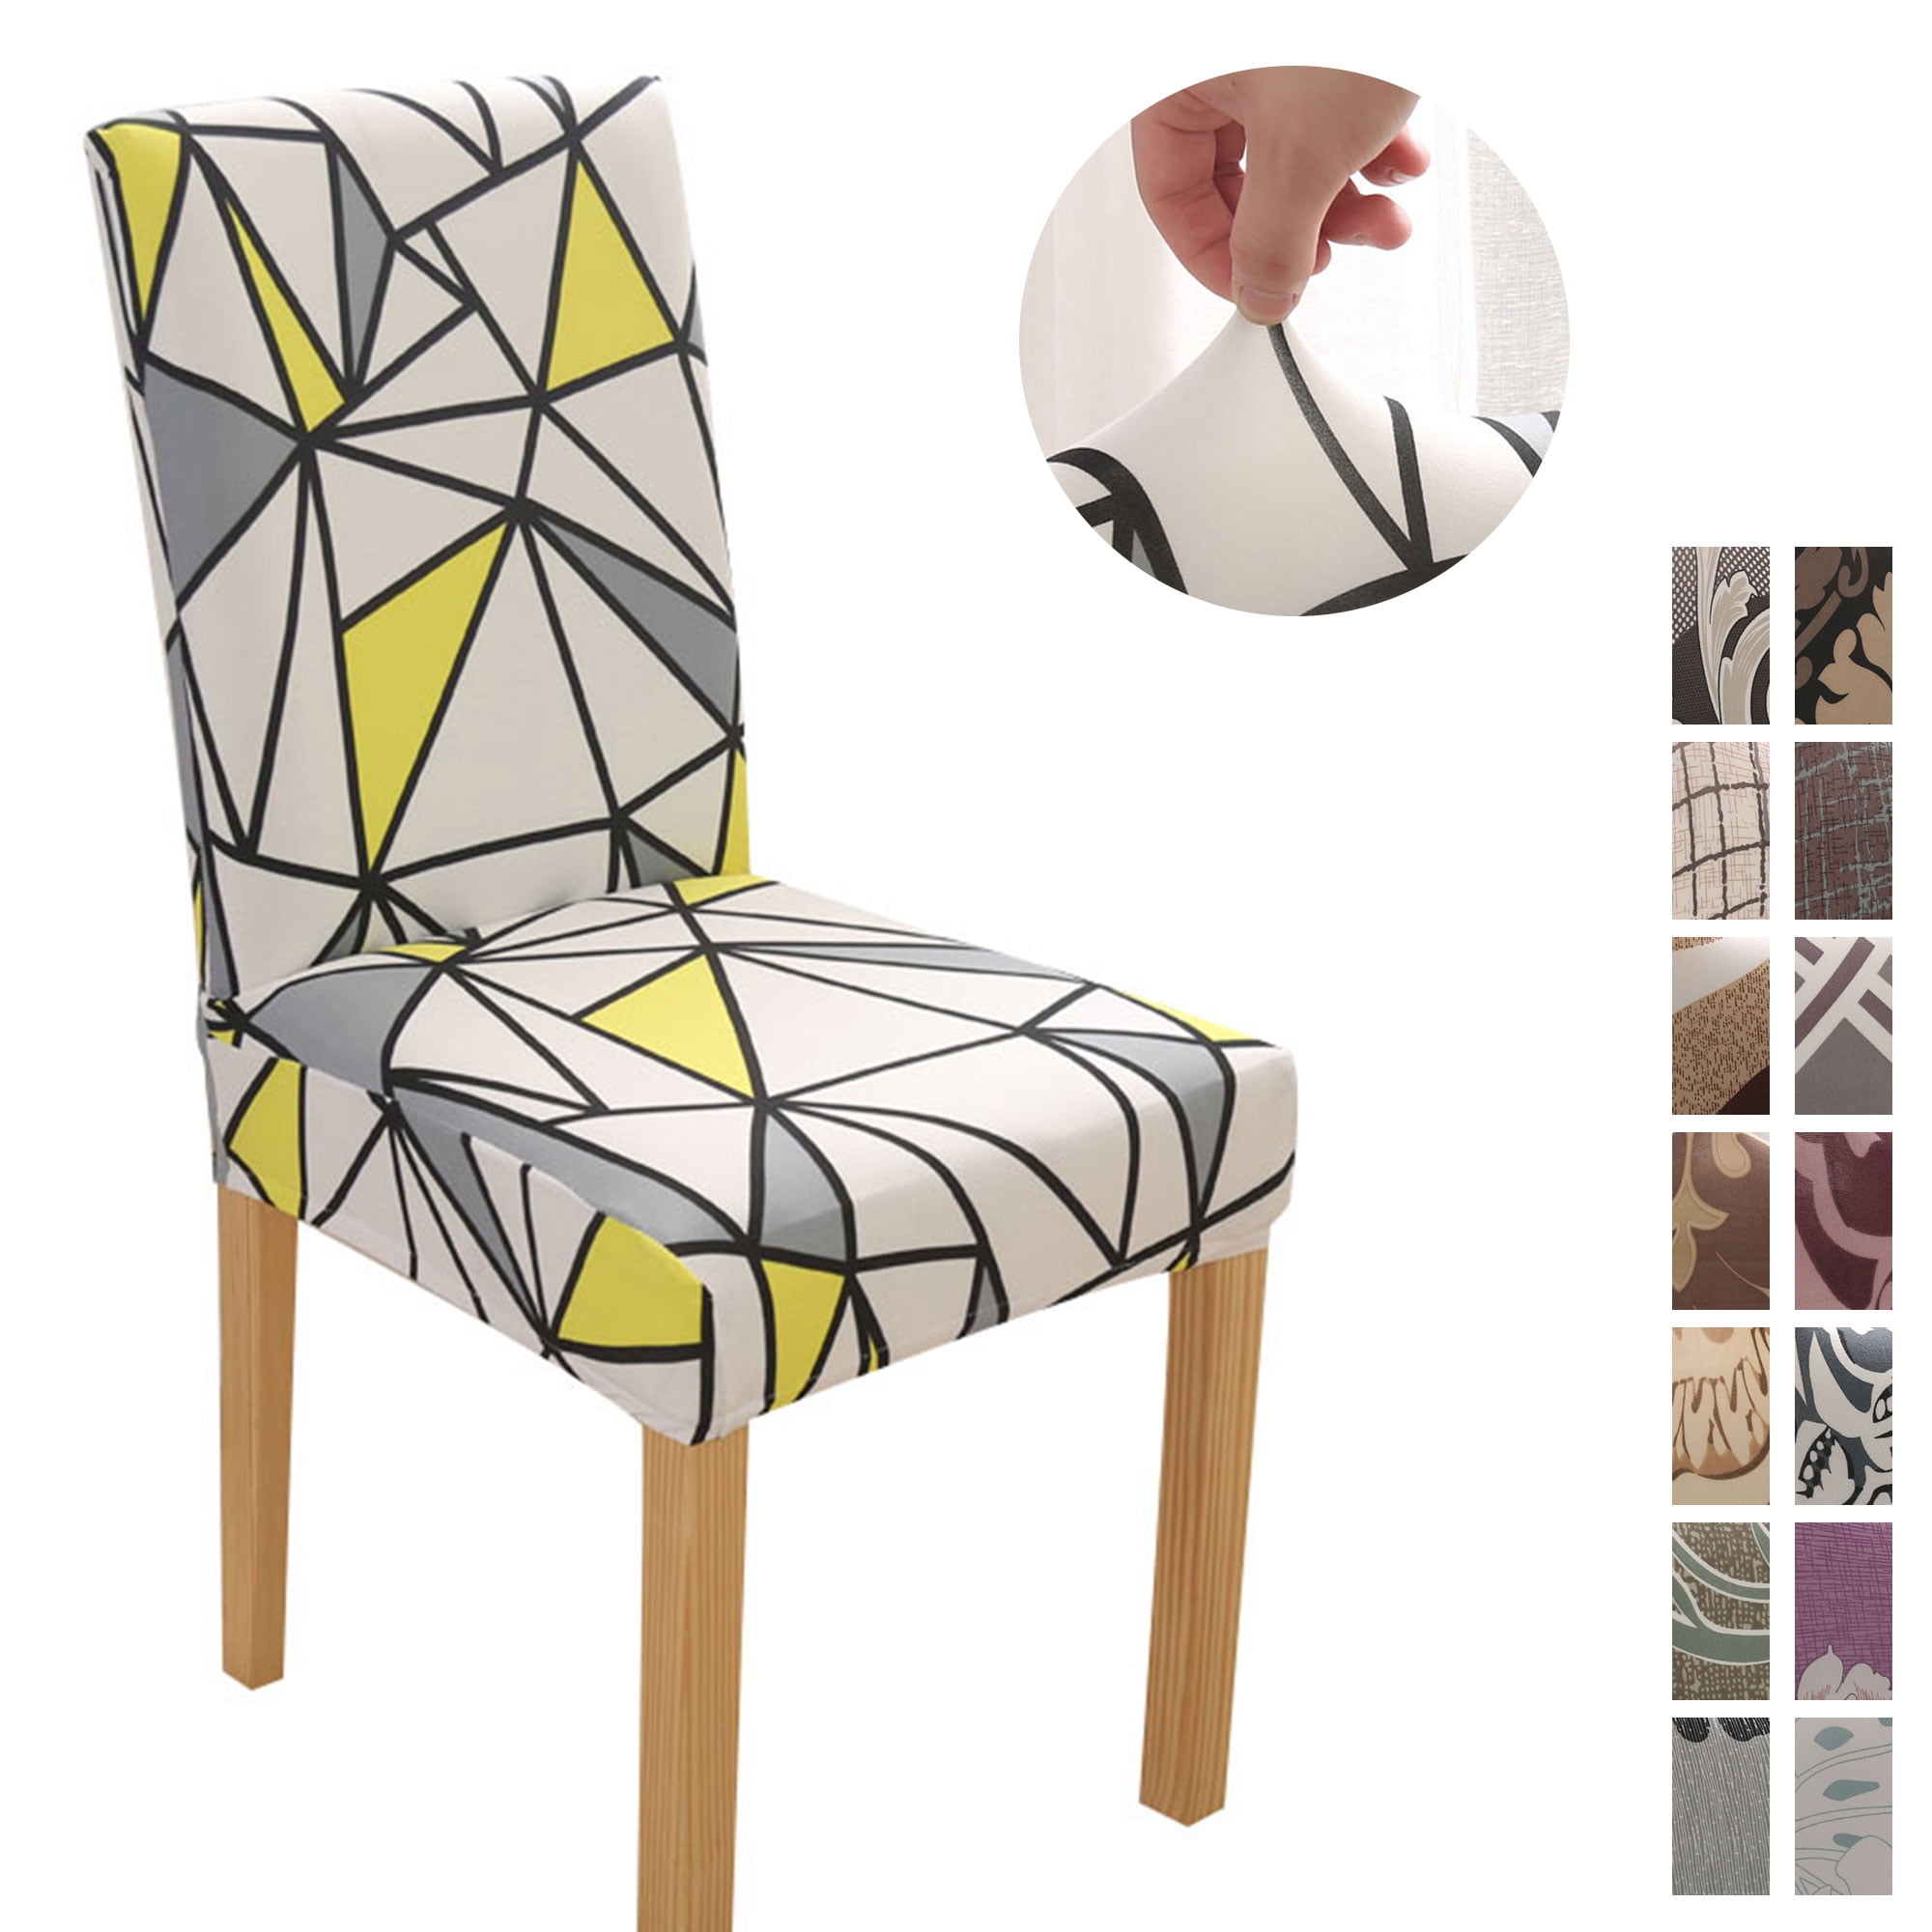 B, 1 piece ele ELEOPTION Printed Stretch Dining Chair Covers Removable Washable Elastic Spandex Dining Chair Slipcovers High Back Chair Protector Seat Covers for Dining Room Wedding Banquet Party 